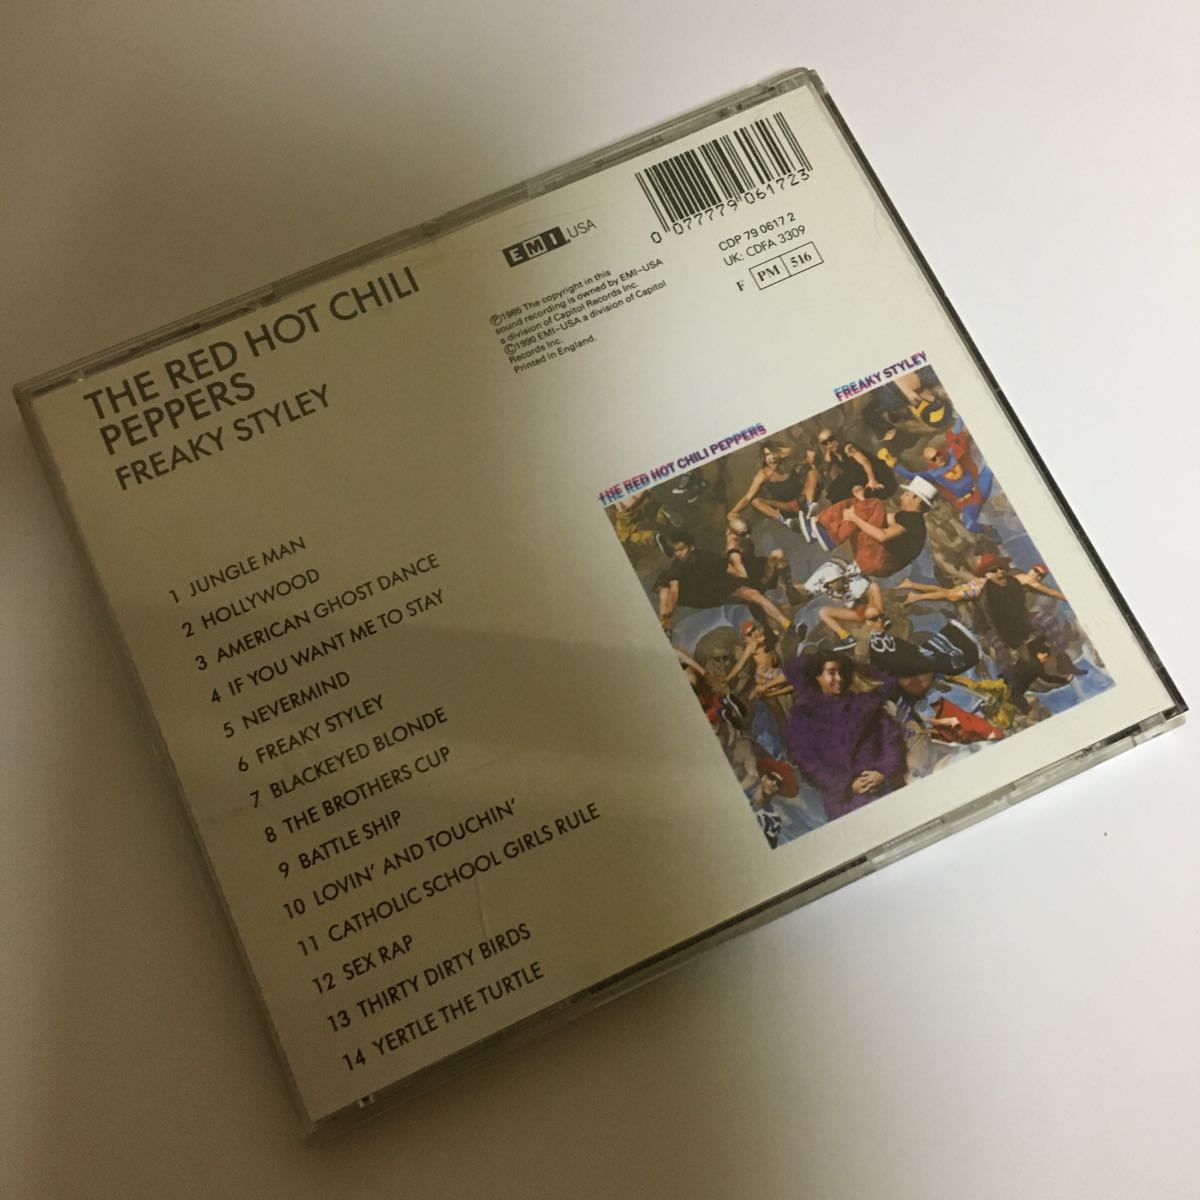 THE RED HOT CHILI PEPPERS レッド・ホット・チリ・ペッパーズ 2ndアルバム『FREAKY STYLEY』UK盤CD 管理番号 RHC-20201009_画像2